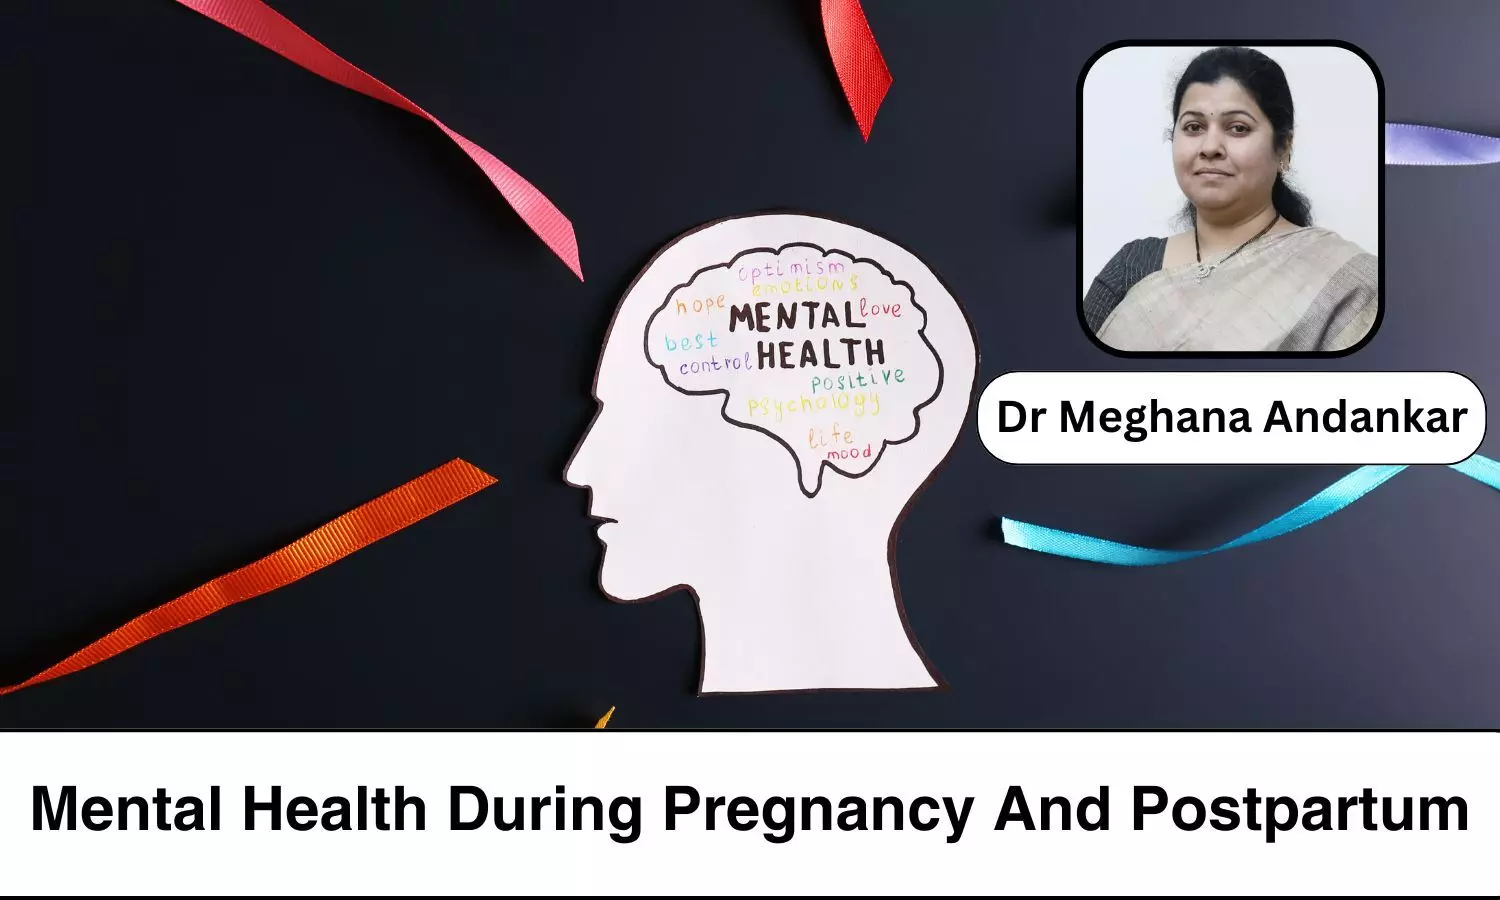 Supporting Mothers: Navigating Mental Health During Pregnancy and Beyond in Todays World - Dr Meghana Andankar